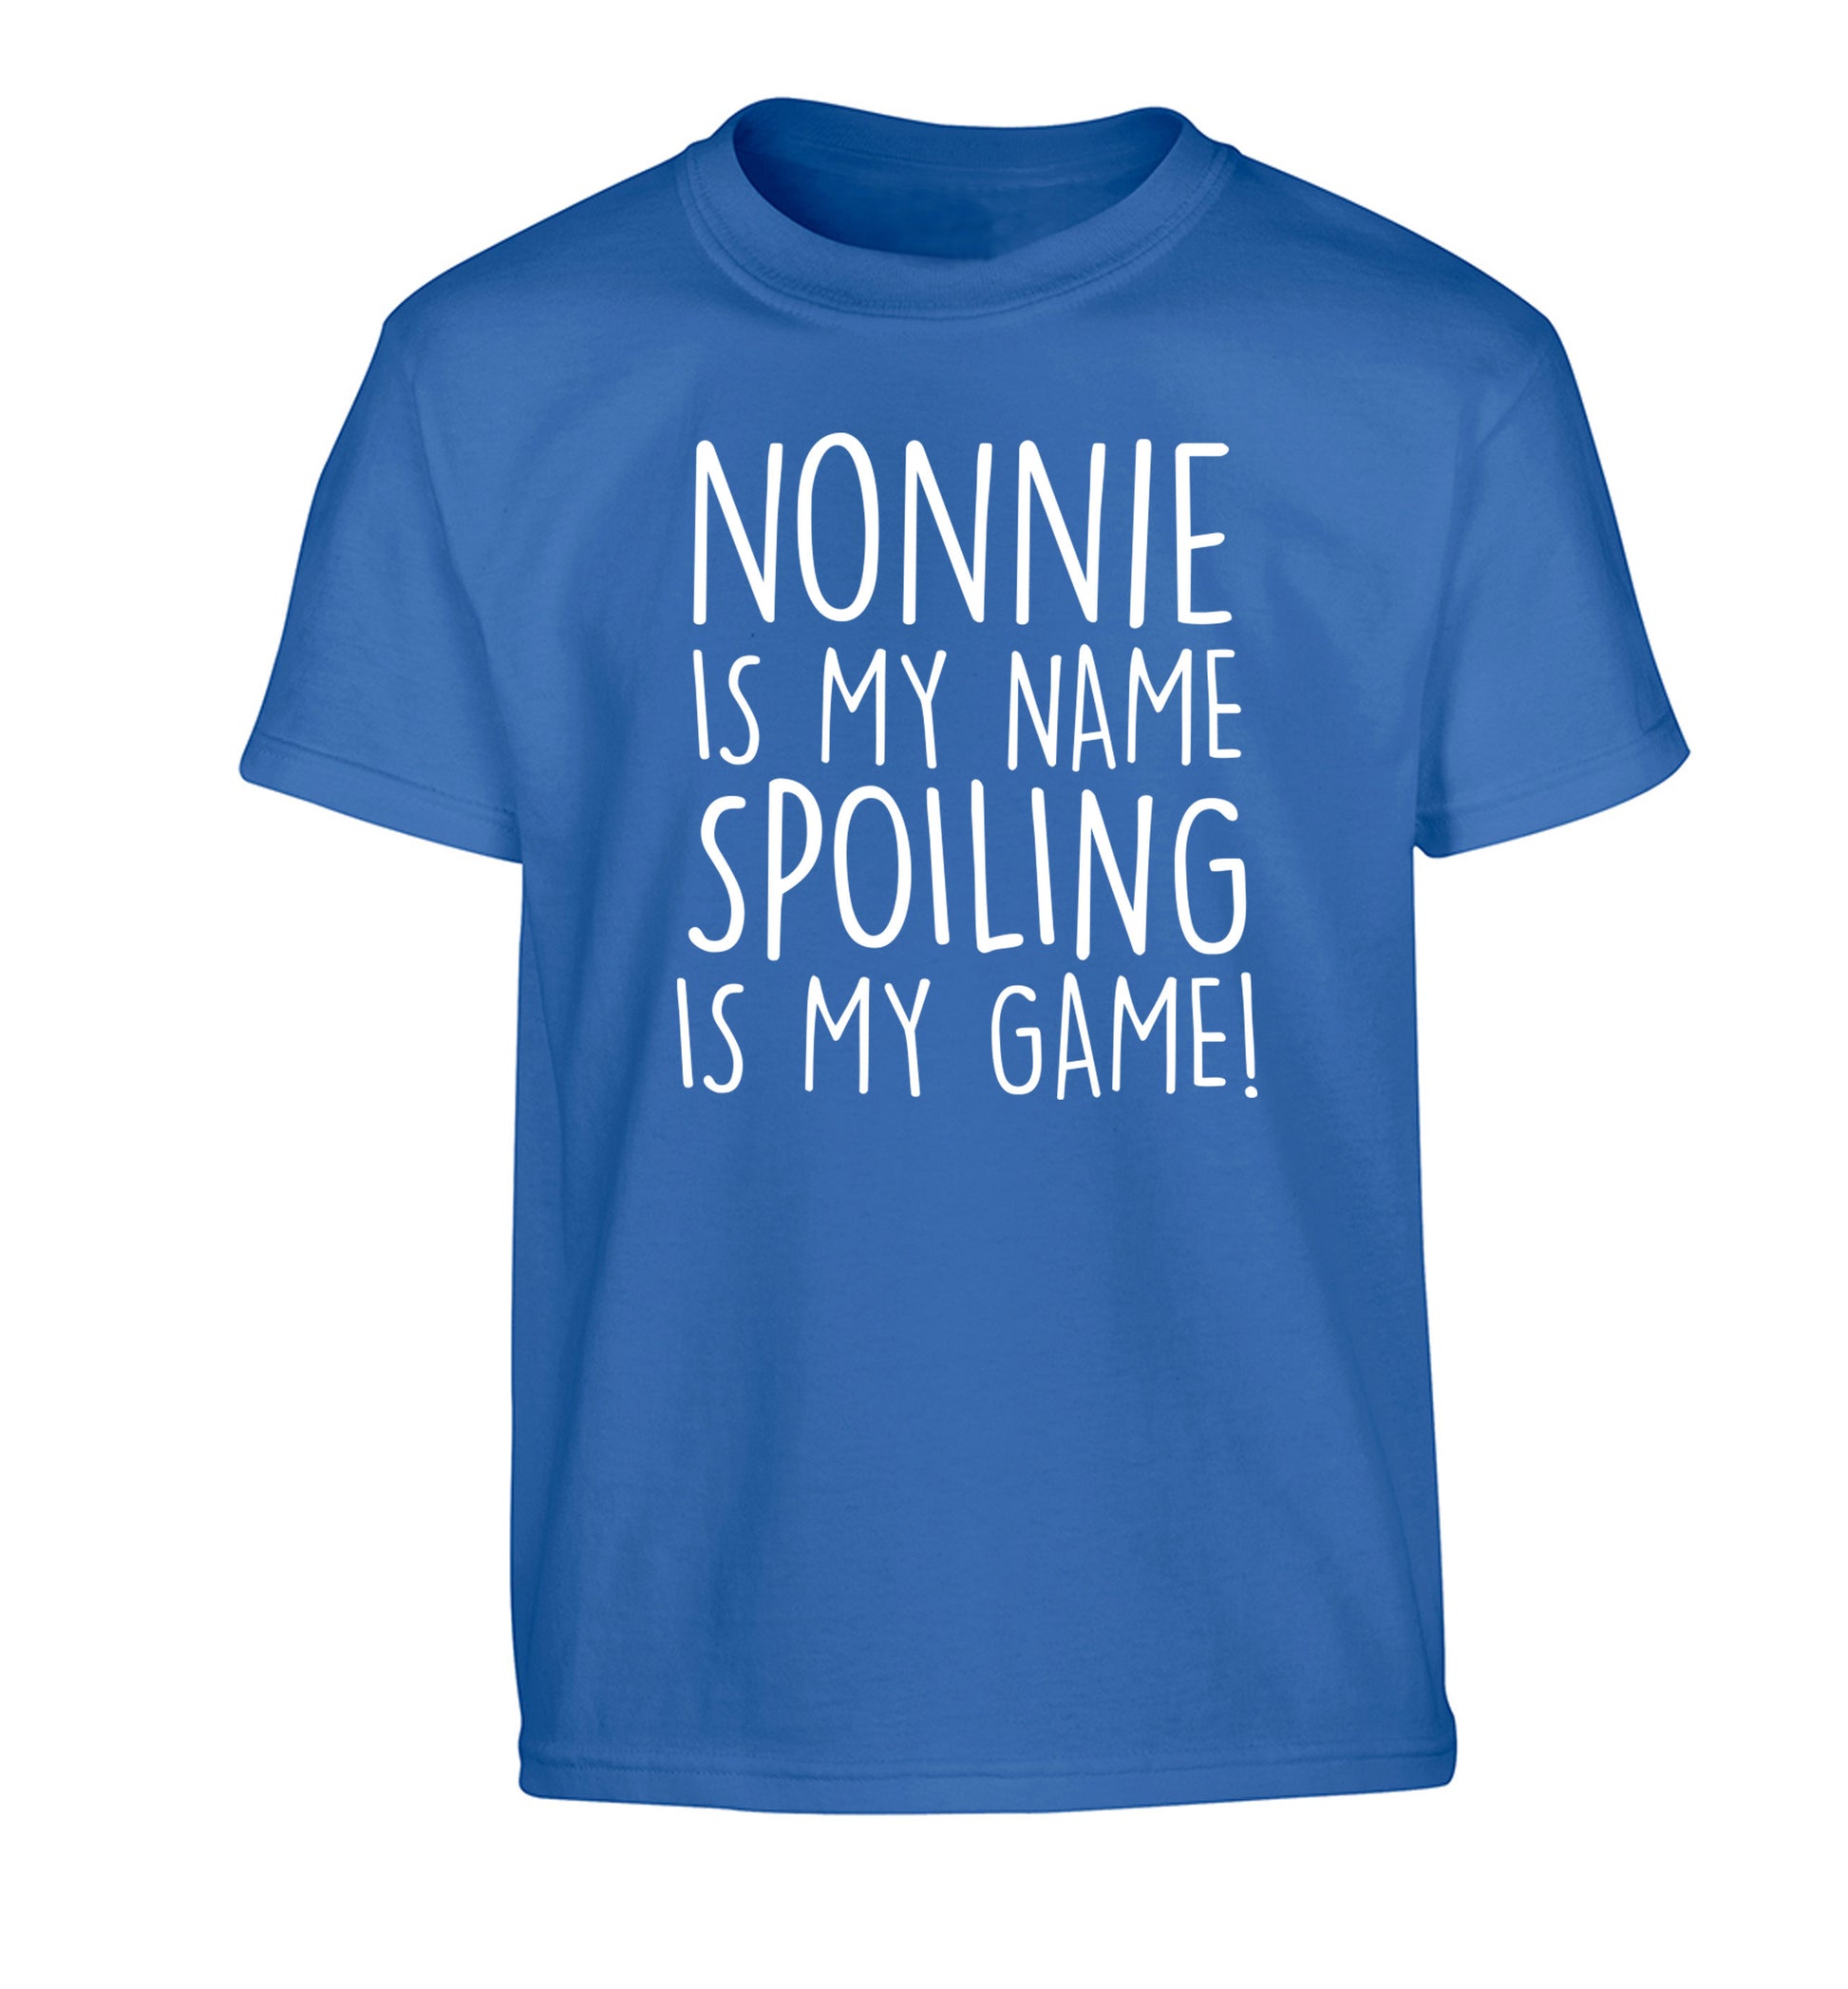 Nonnie is my name, spoiling is my game Children's blue Tshirt 12-14 Years